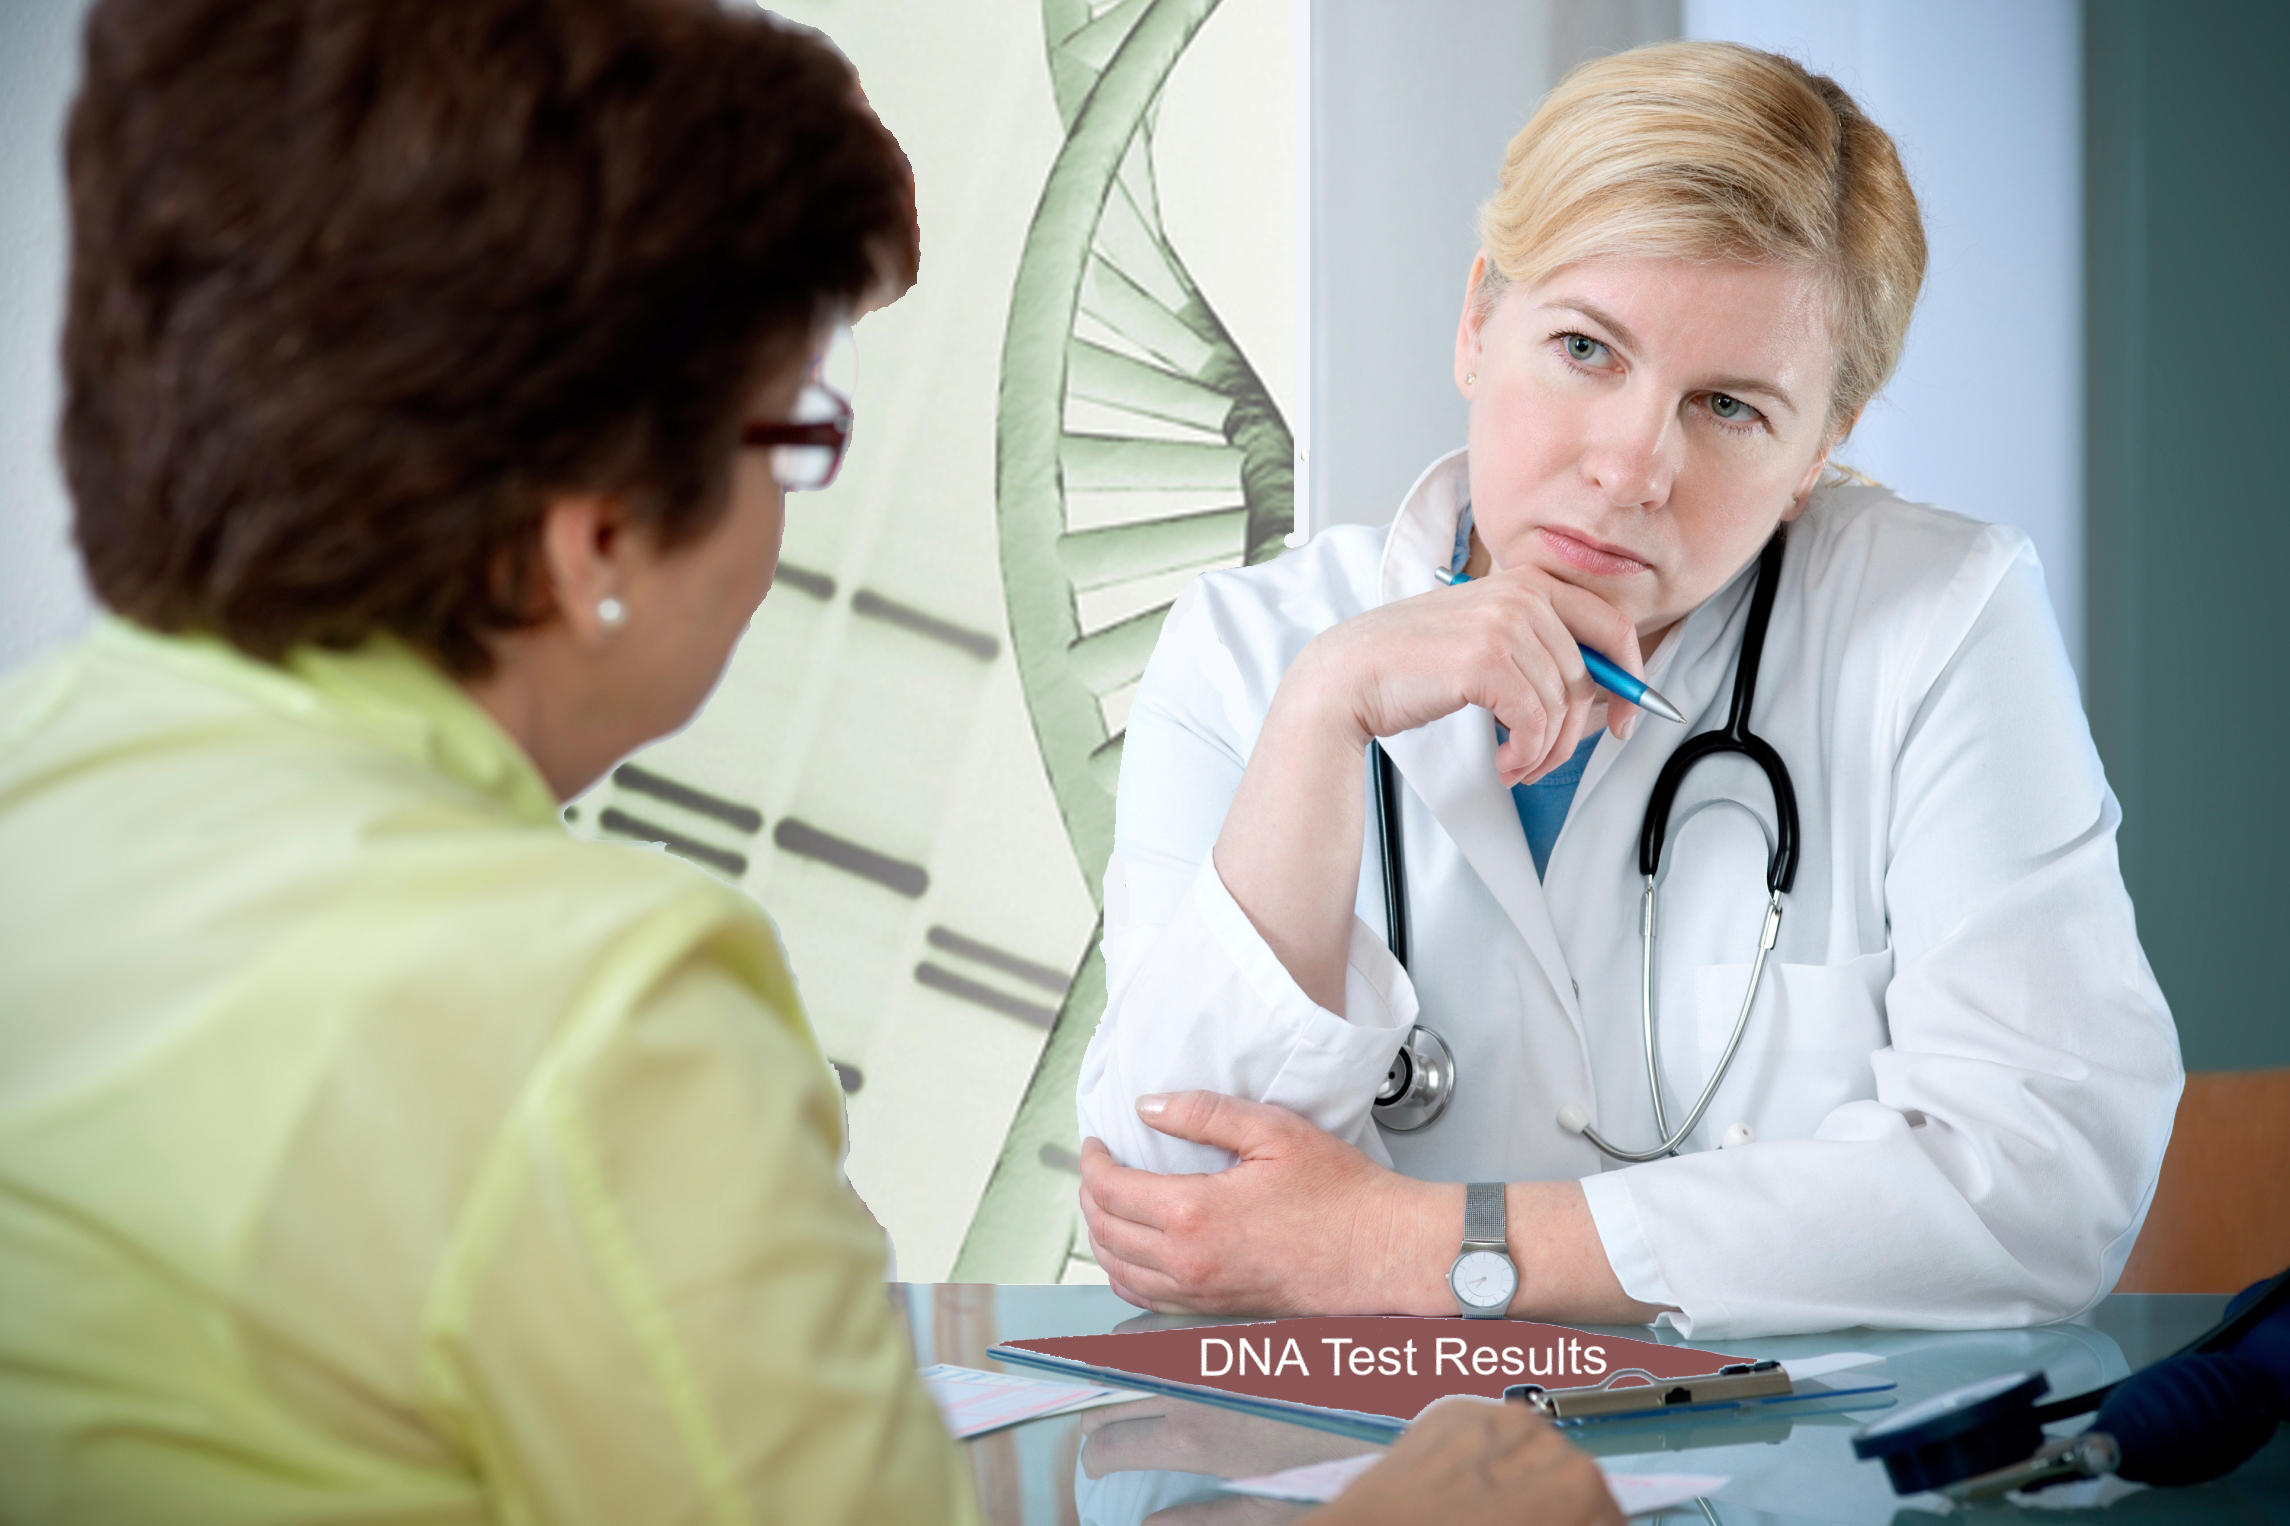 Patient is showing physician her DTC genetic test results